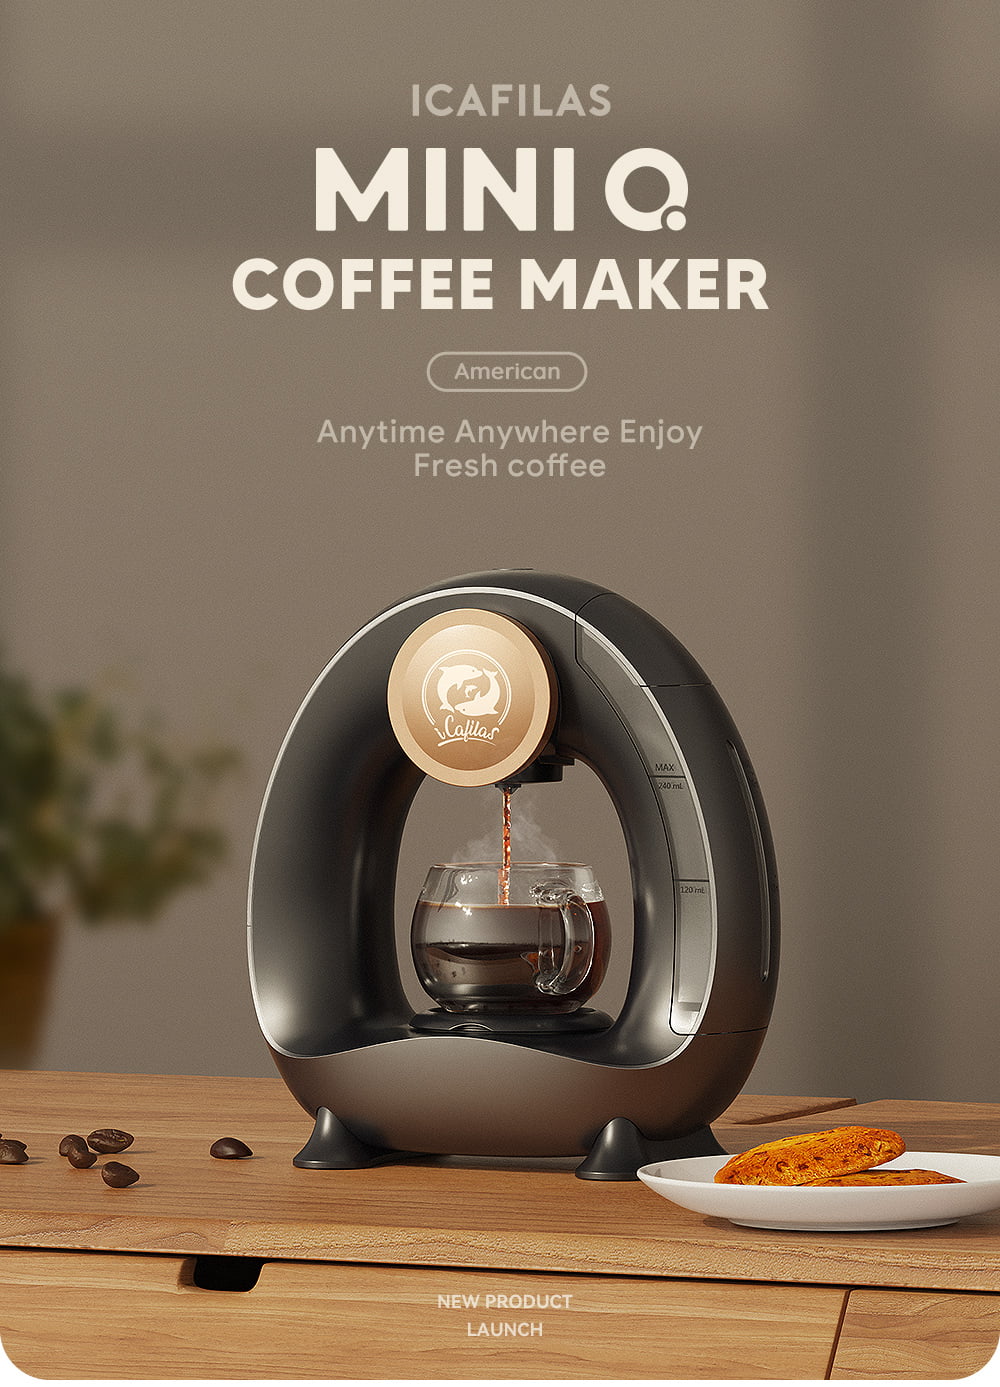 I want to buy small coffee machine for a tiny cafe, can you